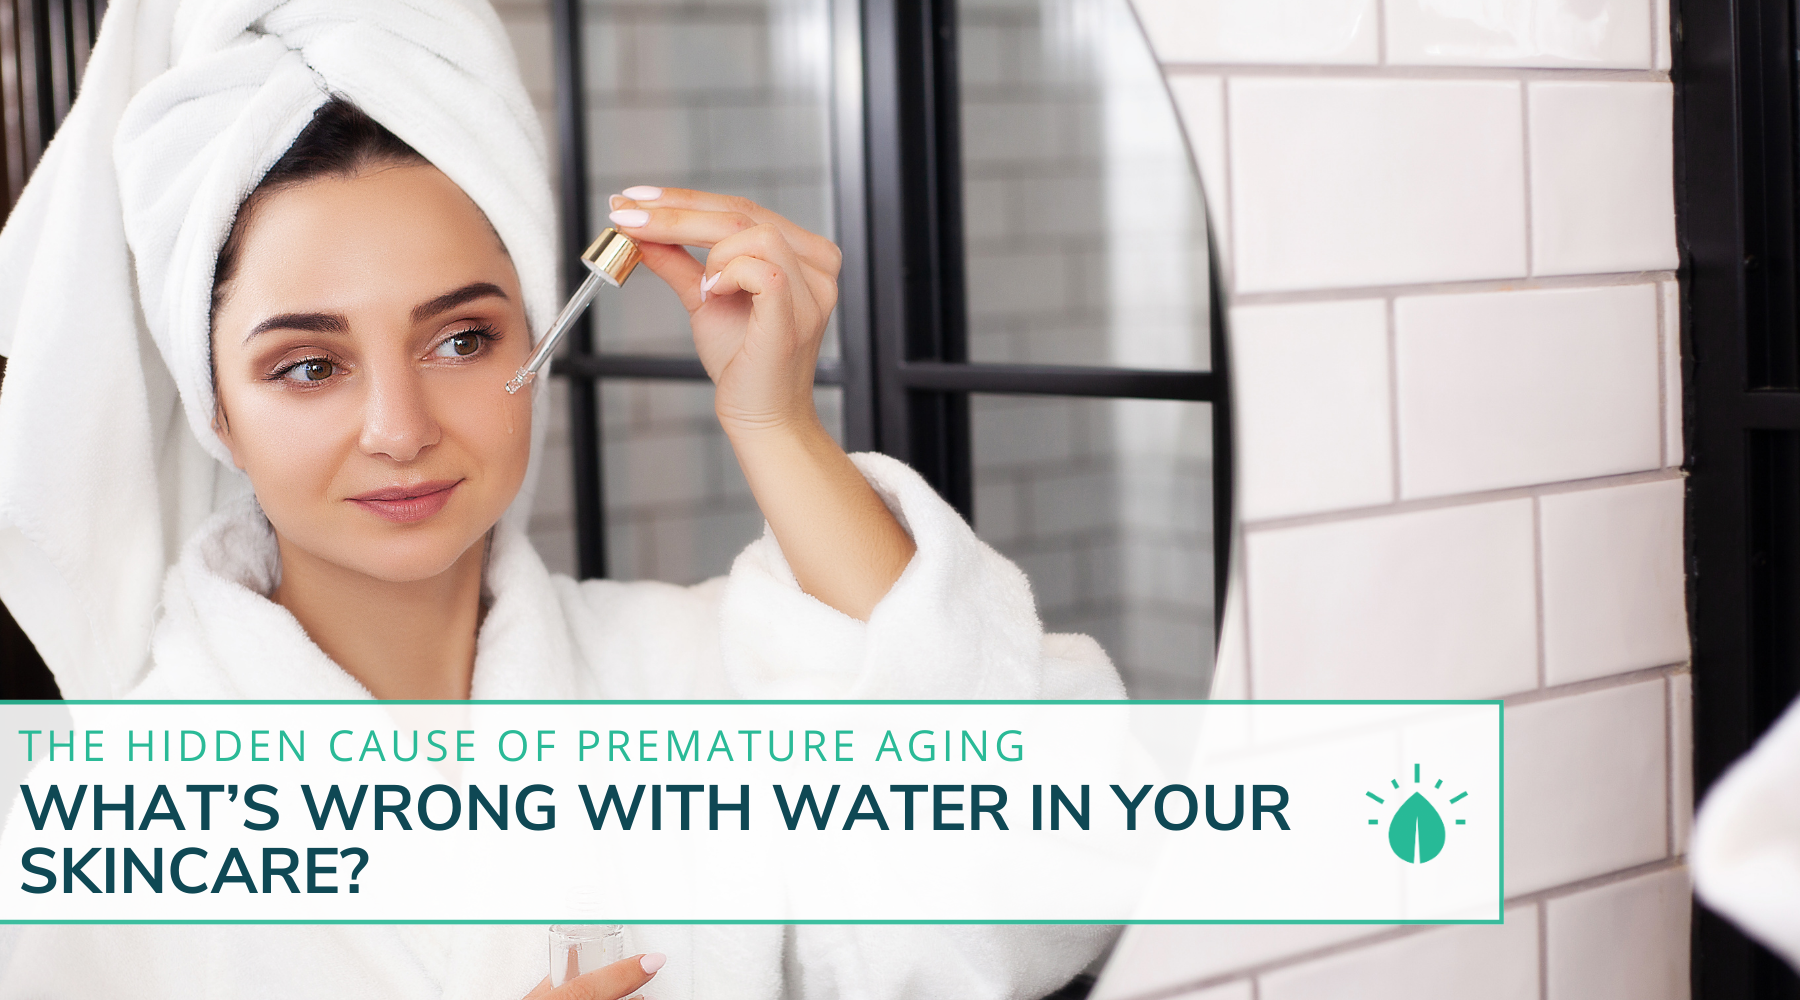 The Hidden Cause Of Premature Aging: What's Wrong With Water In Your Skincare?